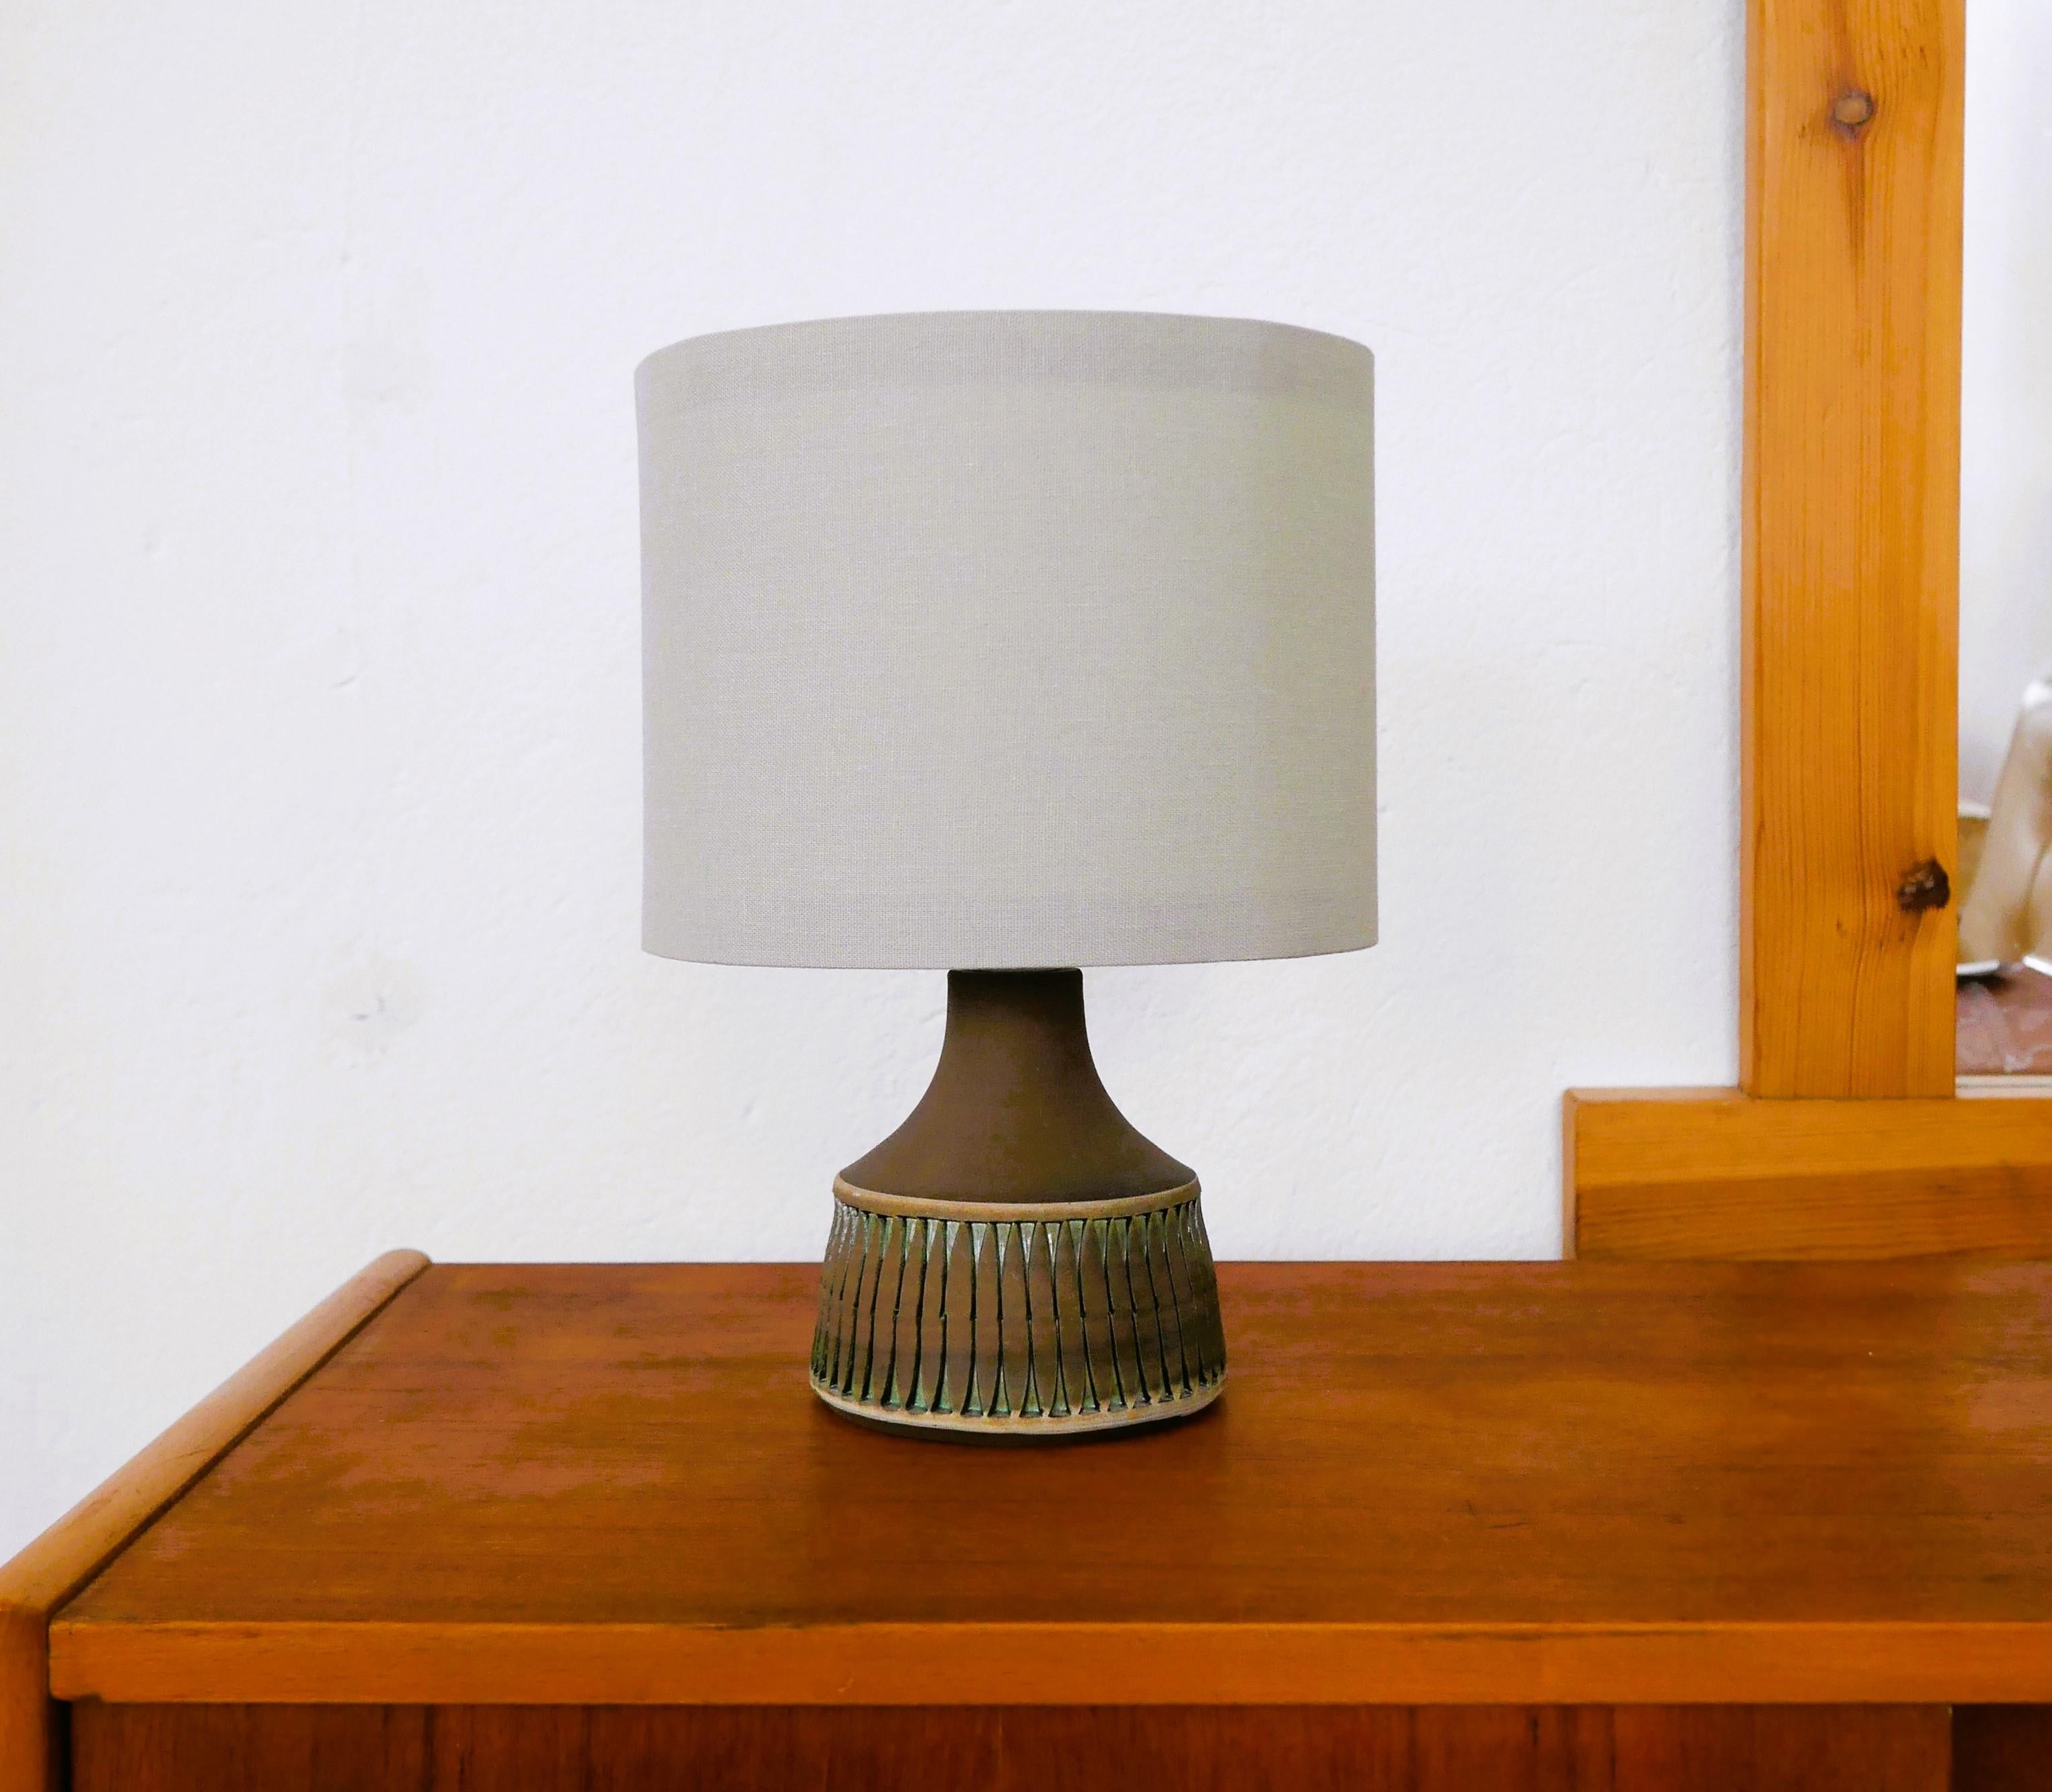 Hand-Crafted 1960s, Ceramic Lamp Base Handmade by Anagrius for Alingsås, Sweden